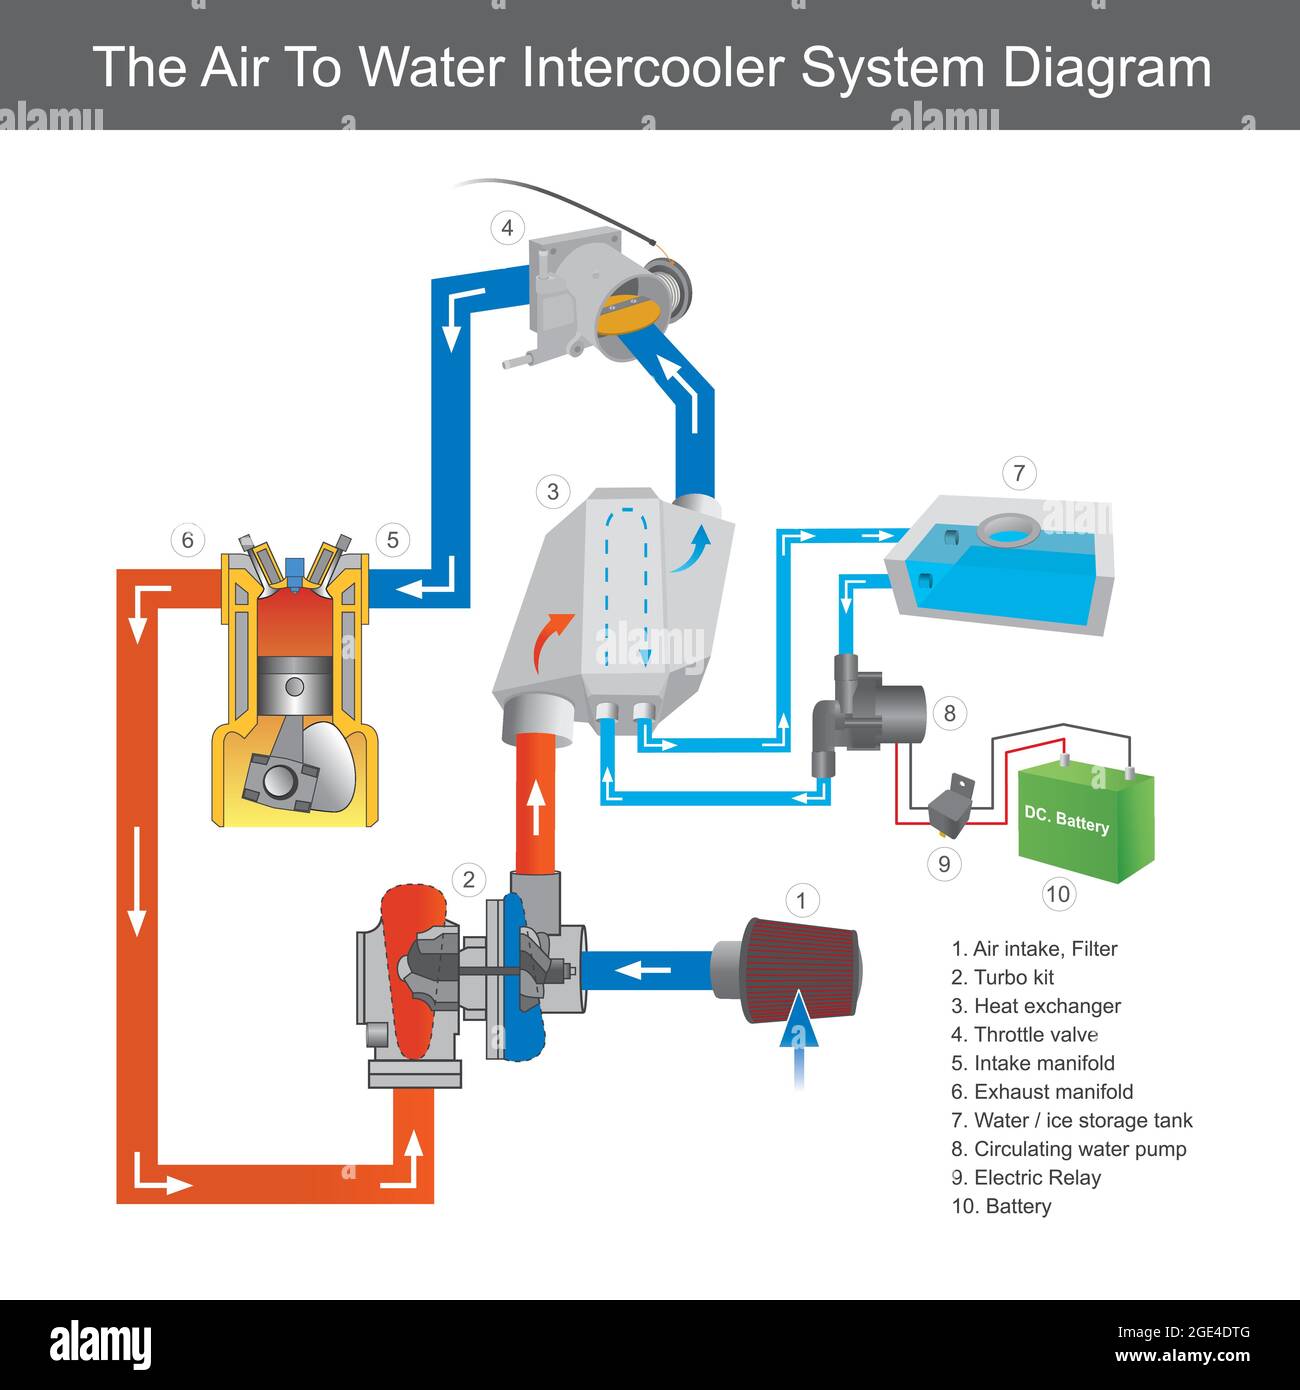 The Air To Water Intercooler System Diagram. Diagram showing using water to air intercooler type for racing car or jet ski use turbocharger system. Stock Vector